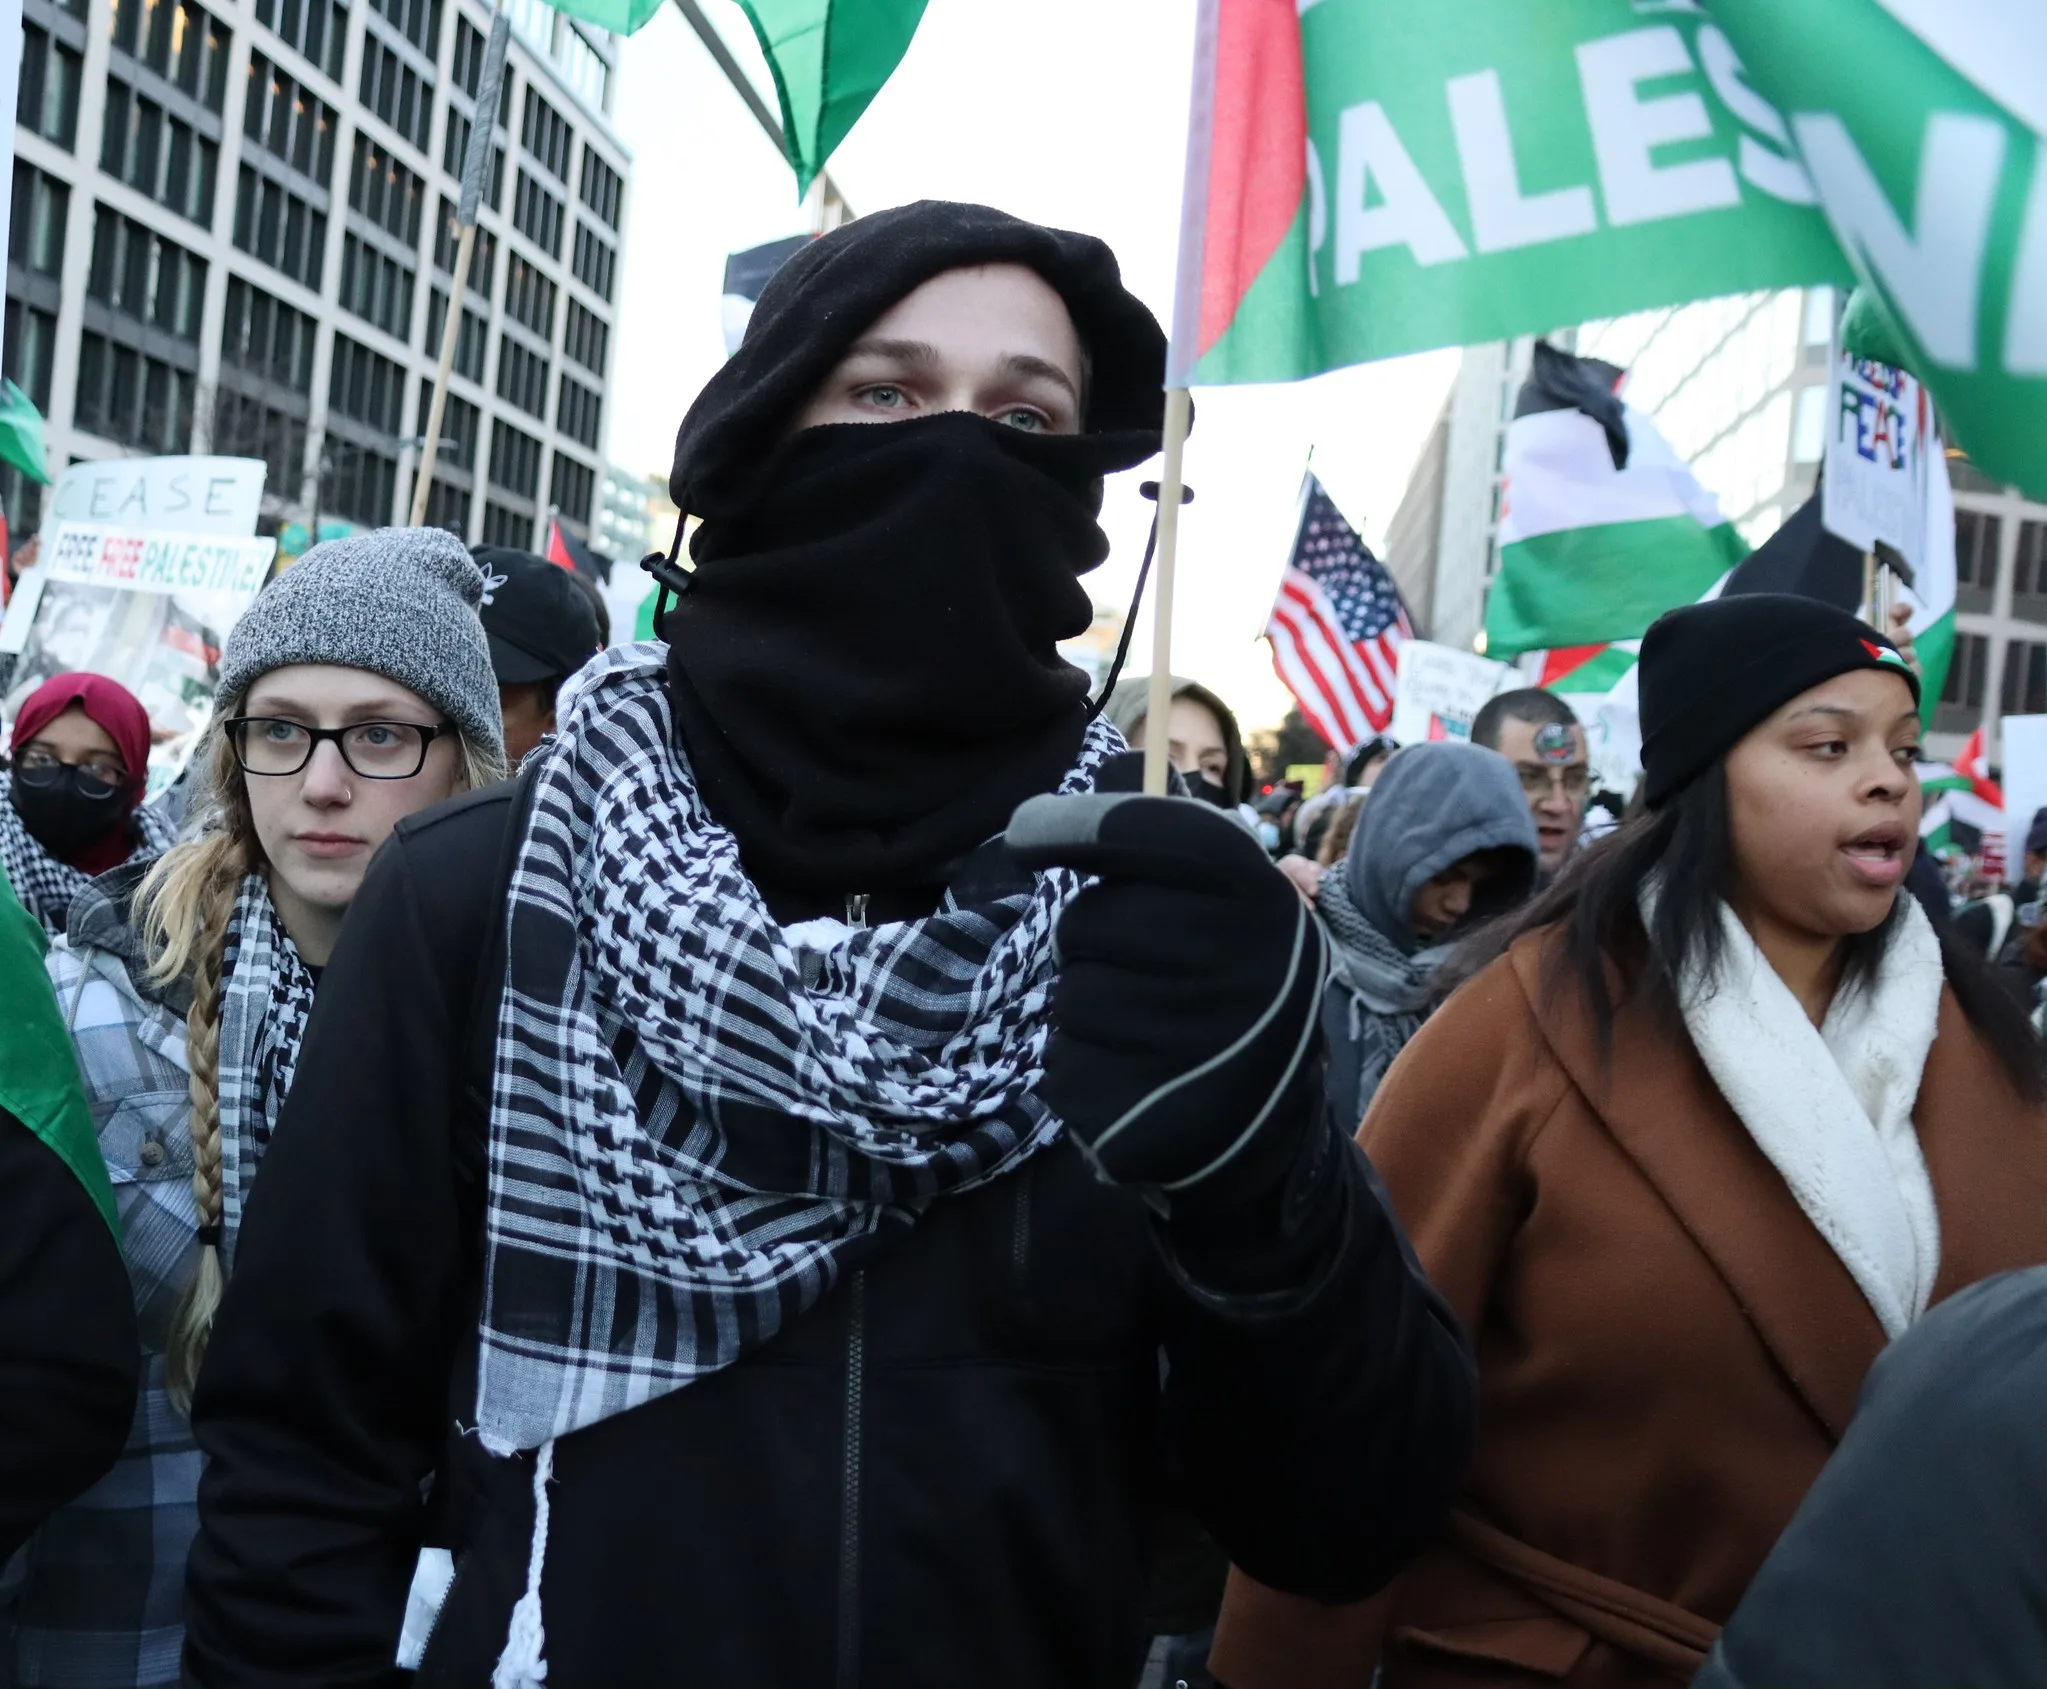 This photo shows a protester wearing a black mask over his nose and mouth, while holding a Palestinian flag.